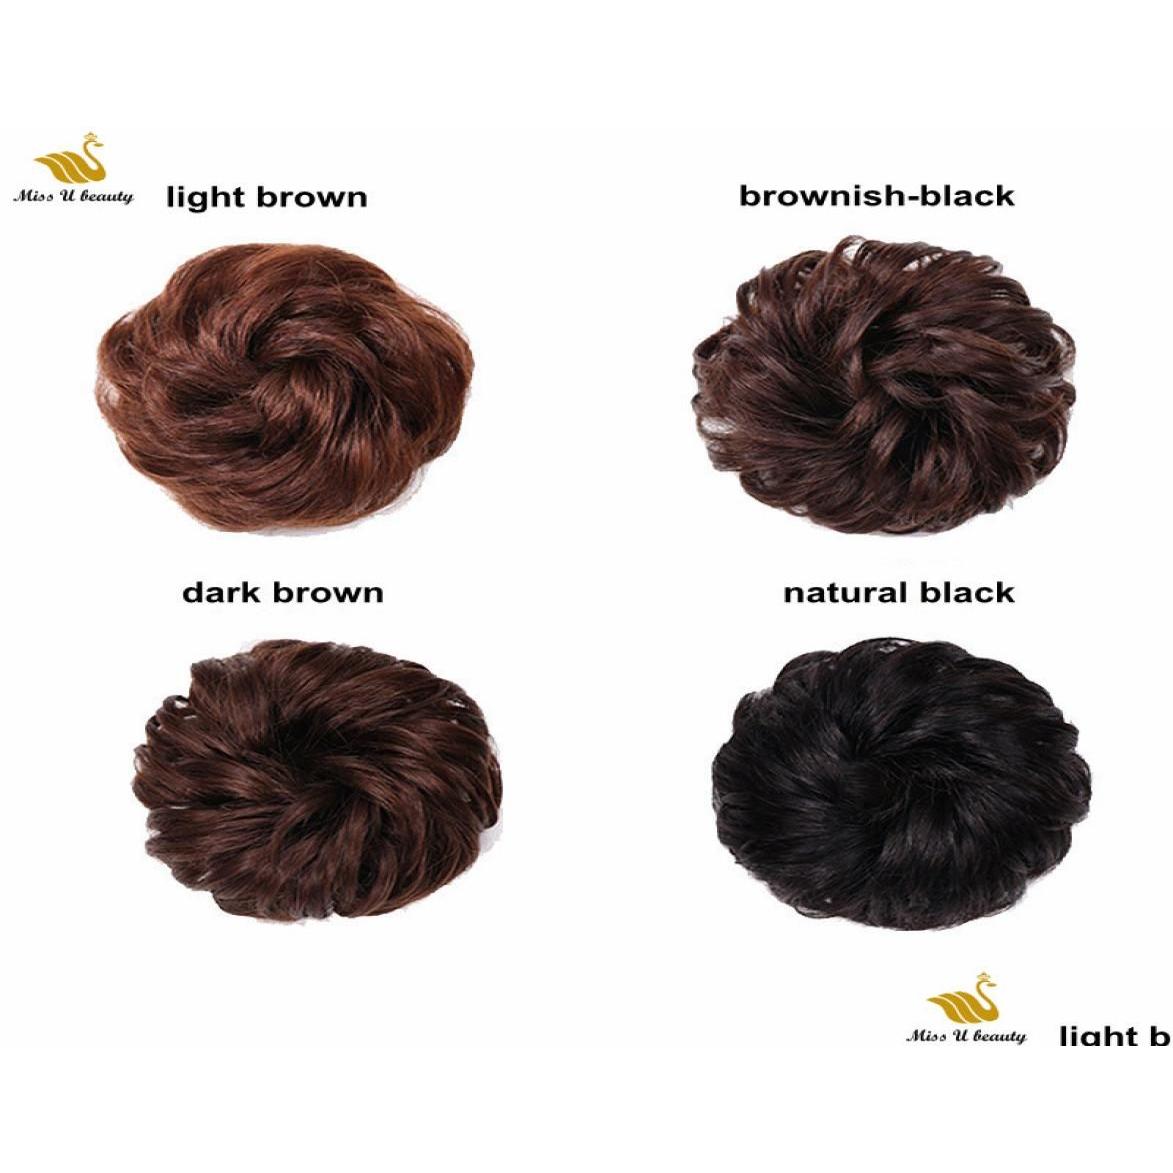 Chignons 100 Real Humanhair Scrunchie Elastic Band Updo Extensions Hair Bun Topknot Black Brown Curly Chignons4786512 Drop Delivery P Dhb2Q